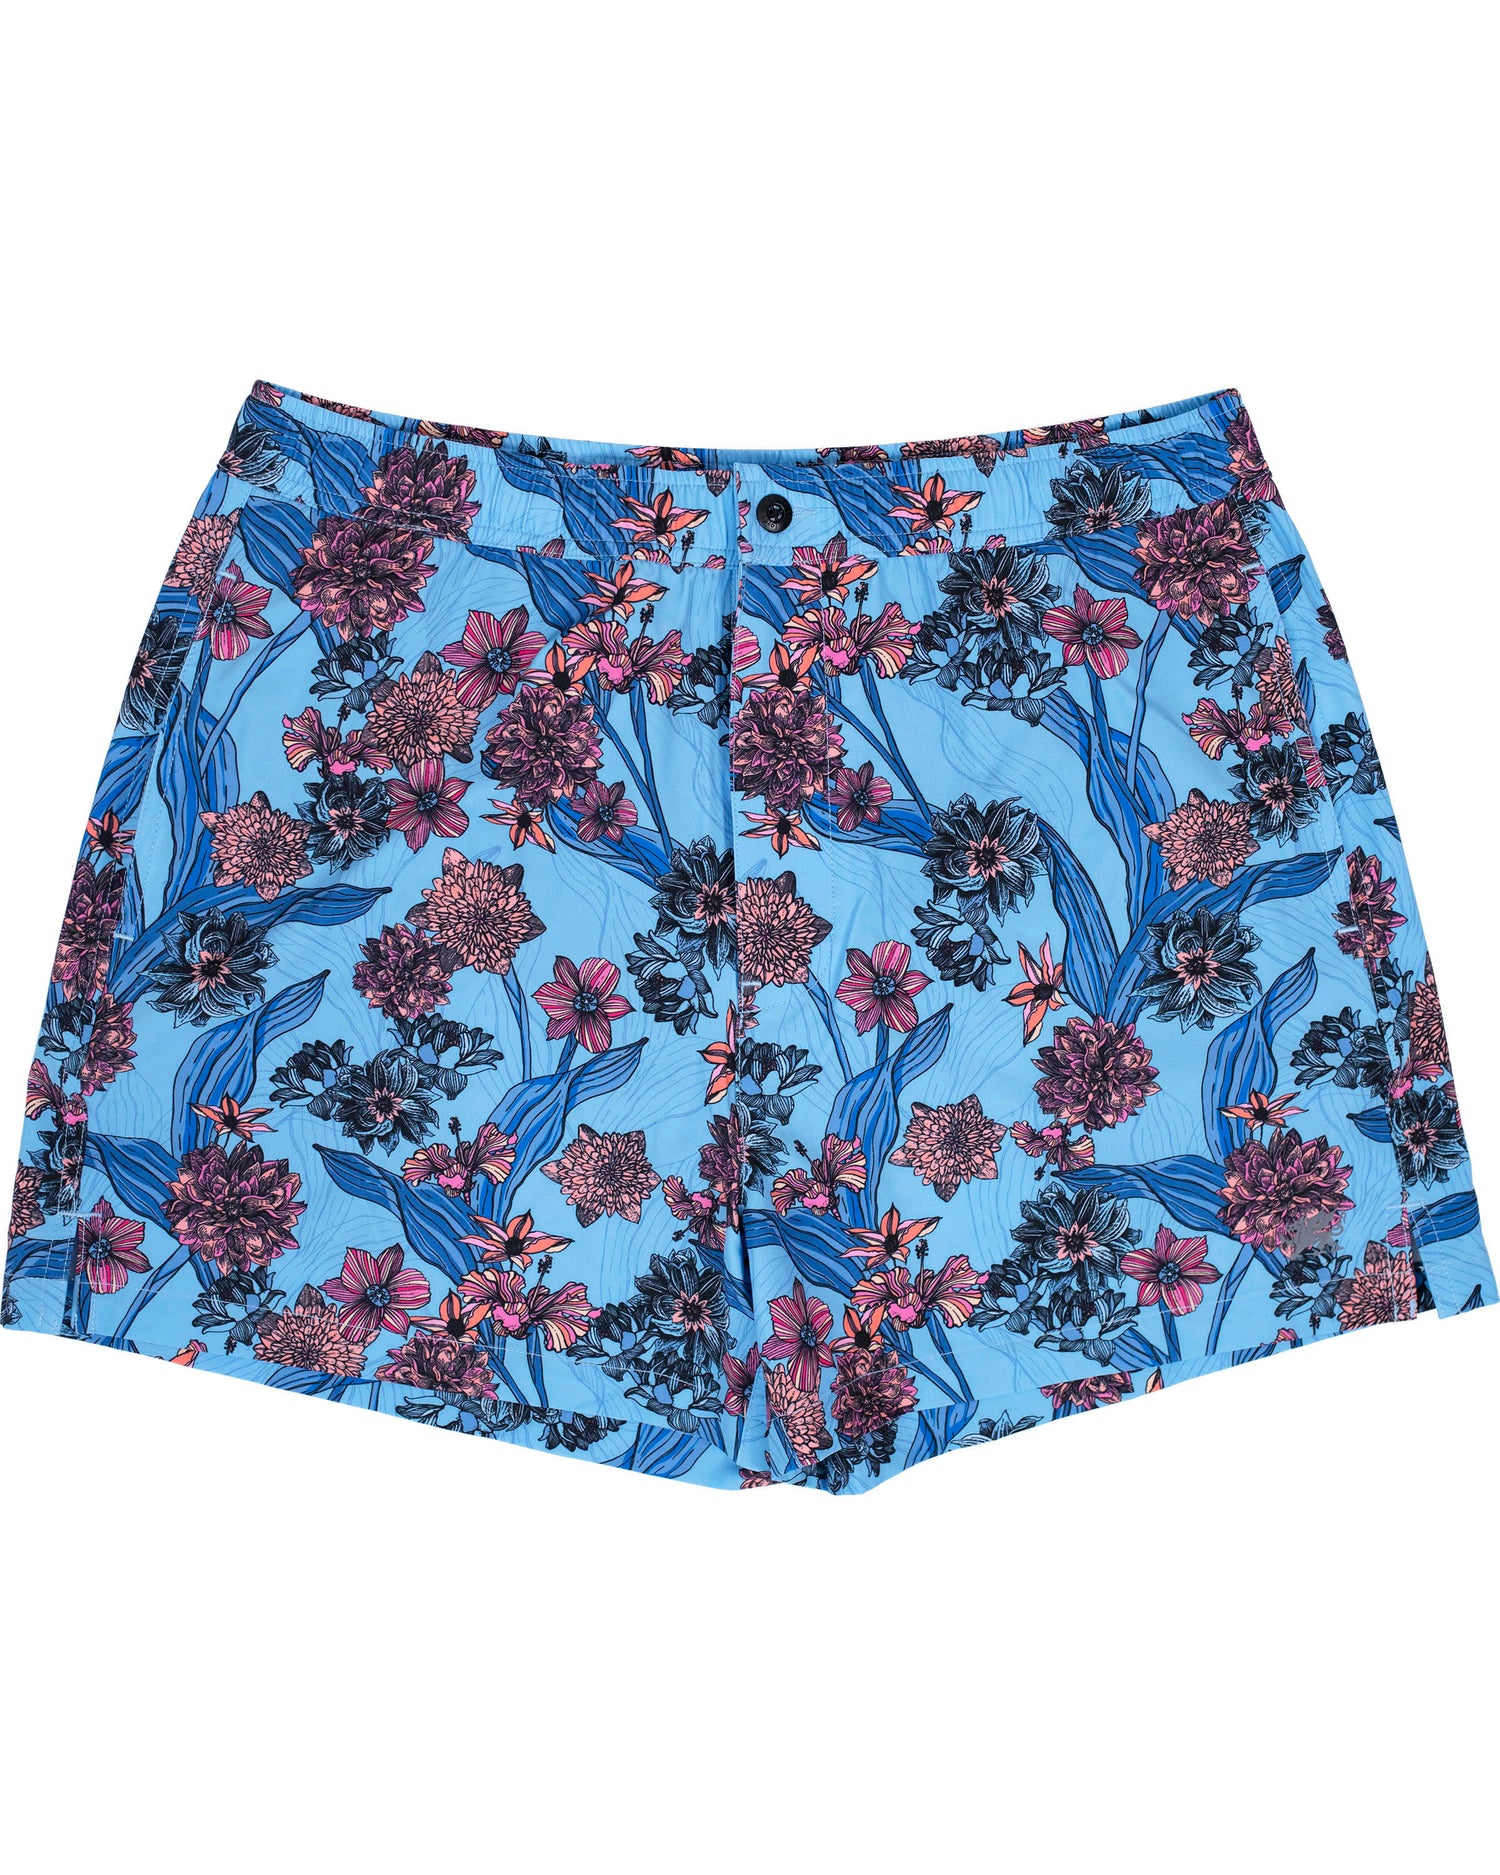 QUACK OCEAN FLORAL BLUE – Lords Of Harlech